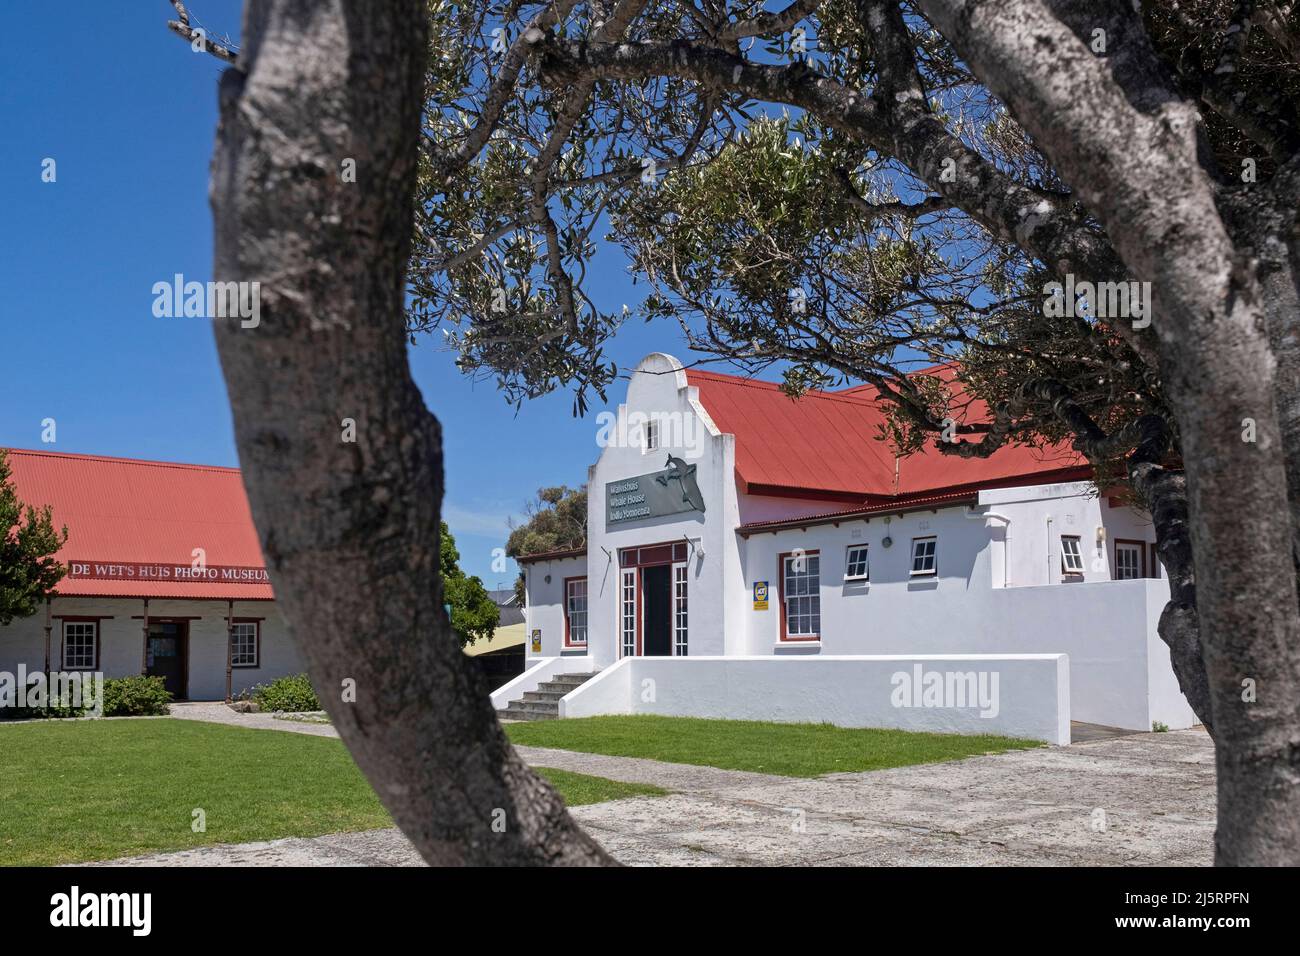 Whale House / Walvishuis, museum about whales and dolphins at the town Hermanus, Overstrand, Overberg, Western Cape Province, South Africa Stock Photo